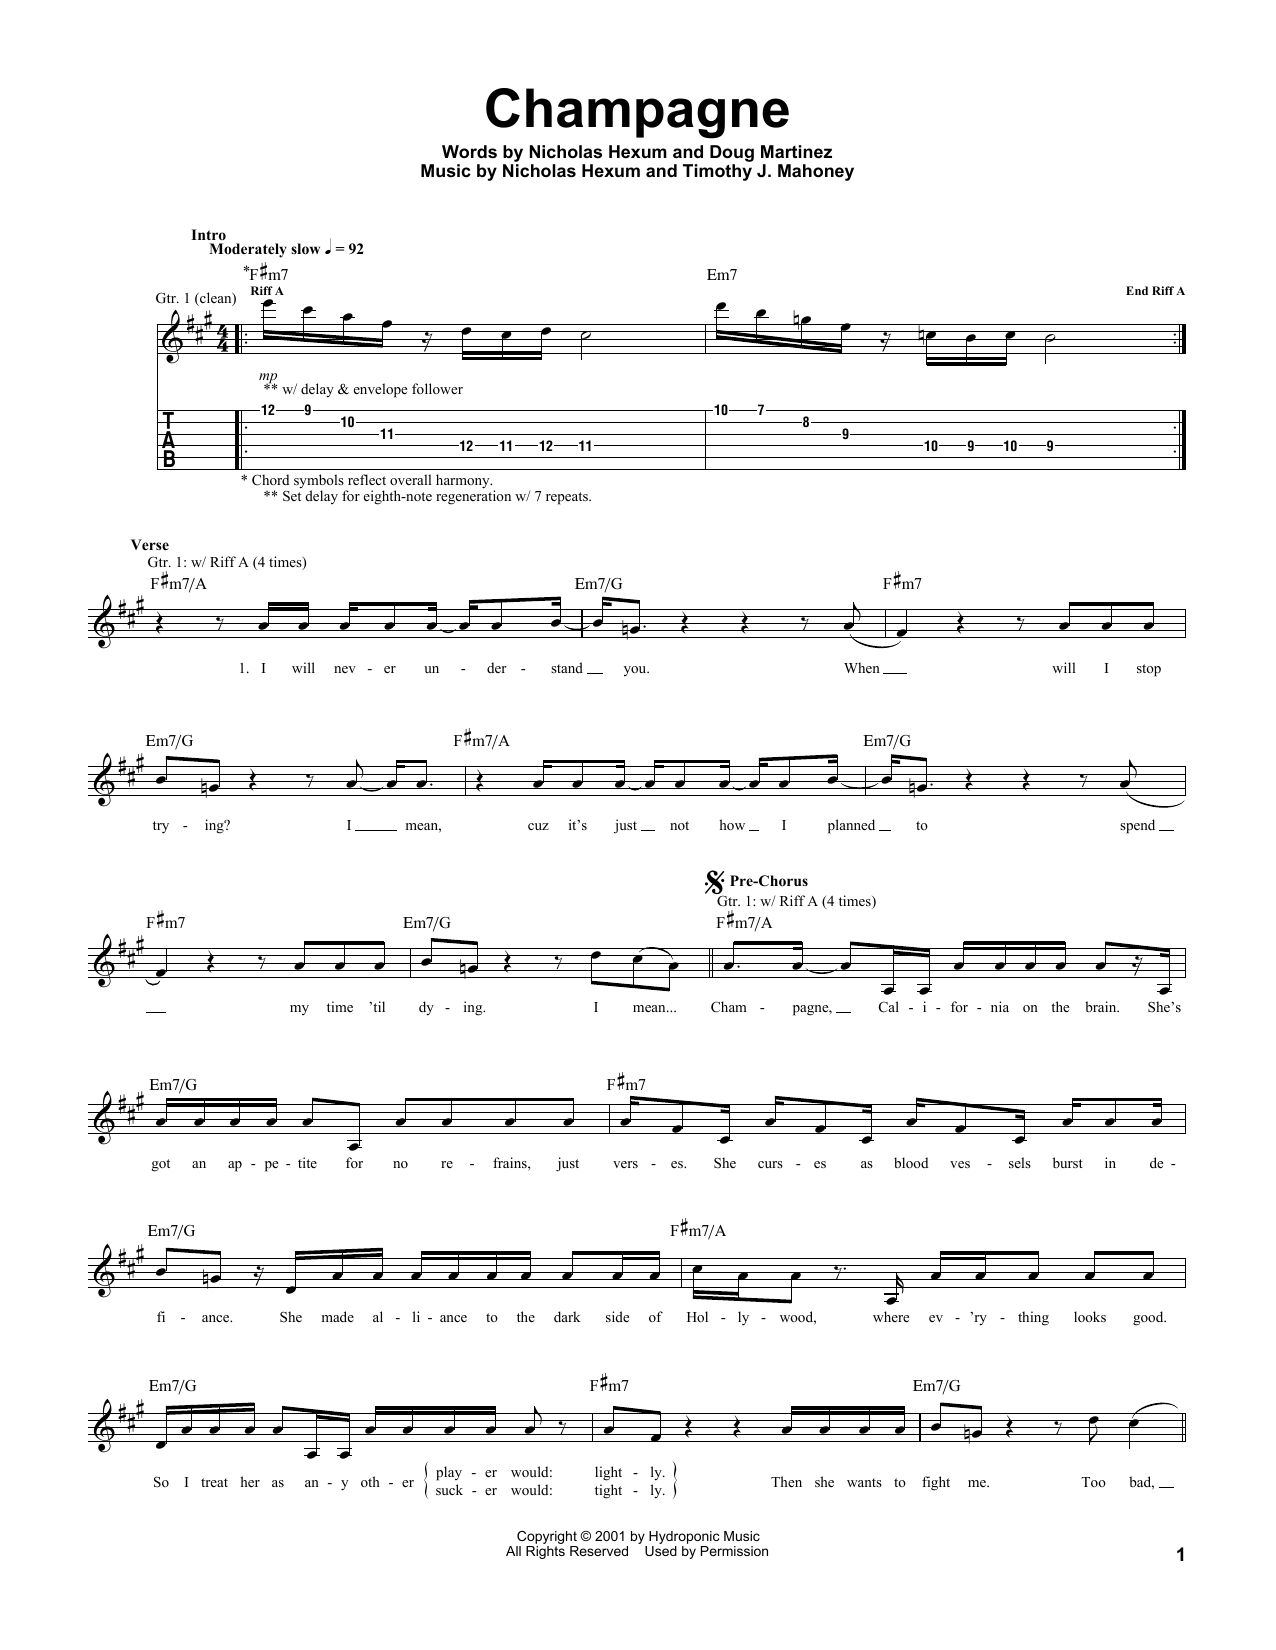 Download 311 Champagne Sheet Music